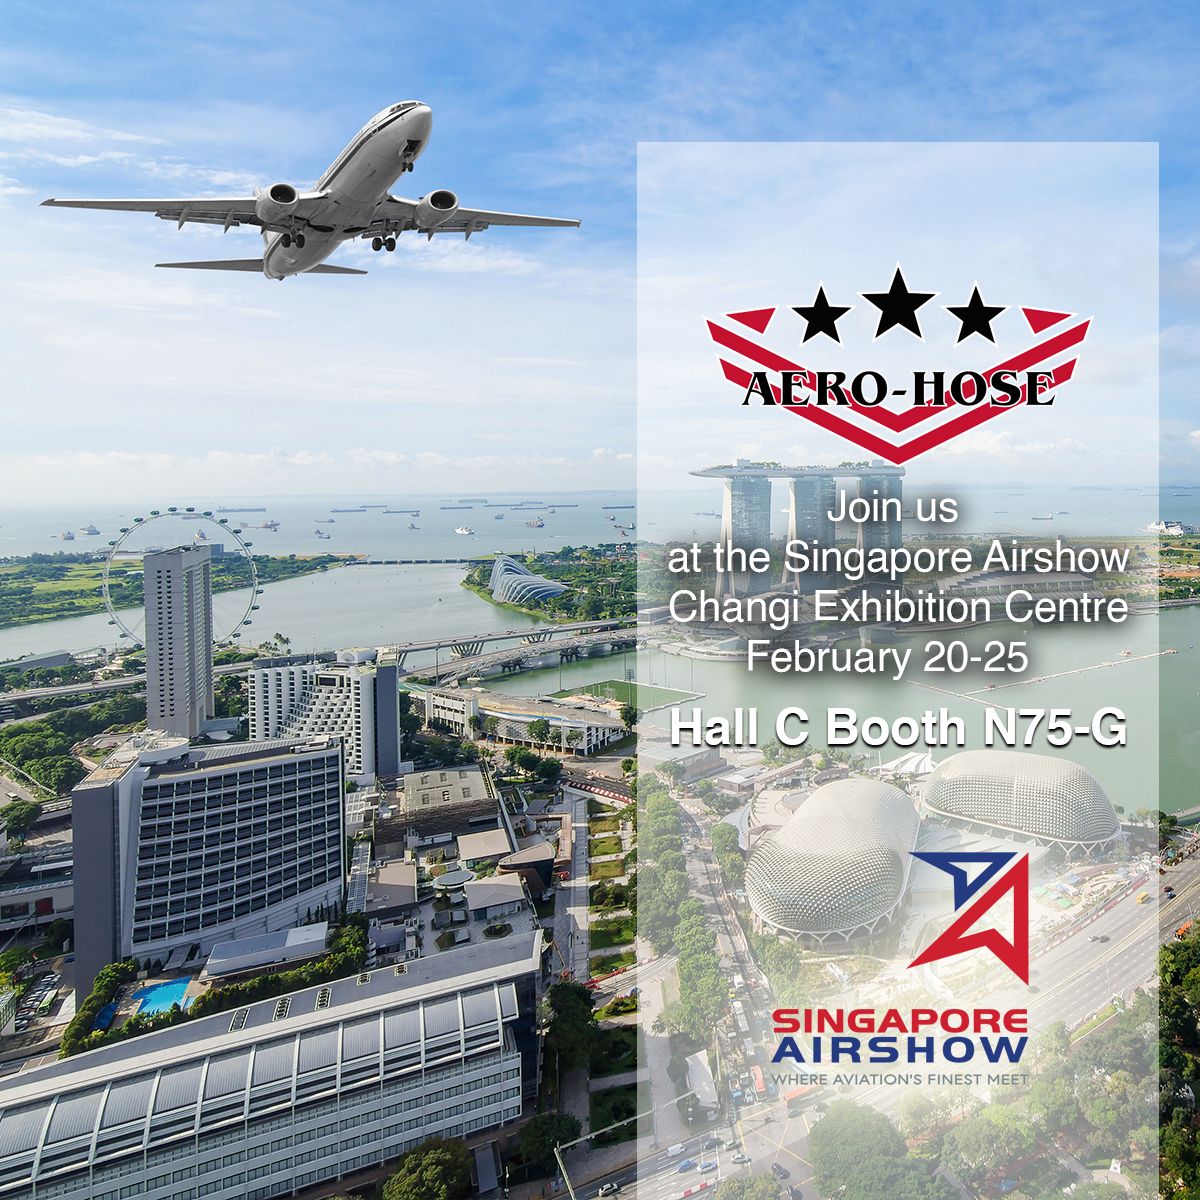 advertisement for aero-hose at the singapore airshow featuring an airplane in flight over a city, with event details and auto draft logo included.